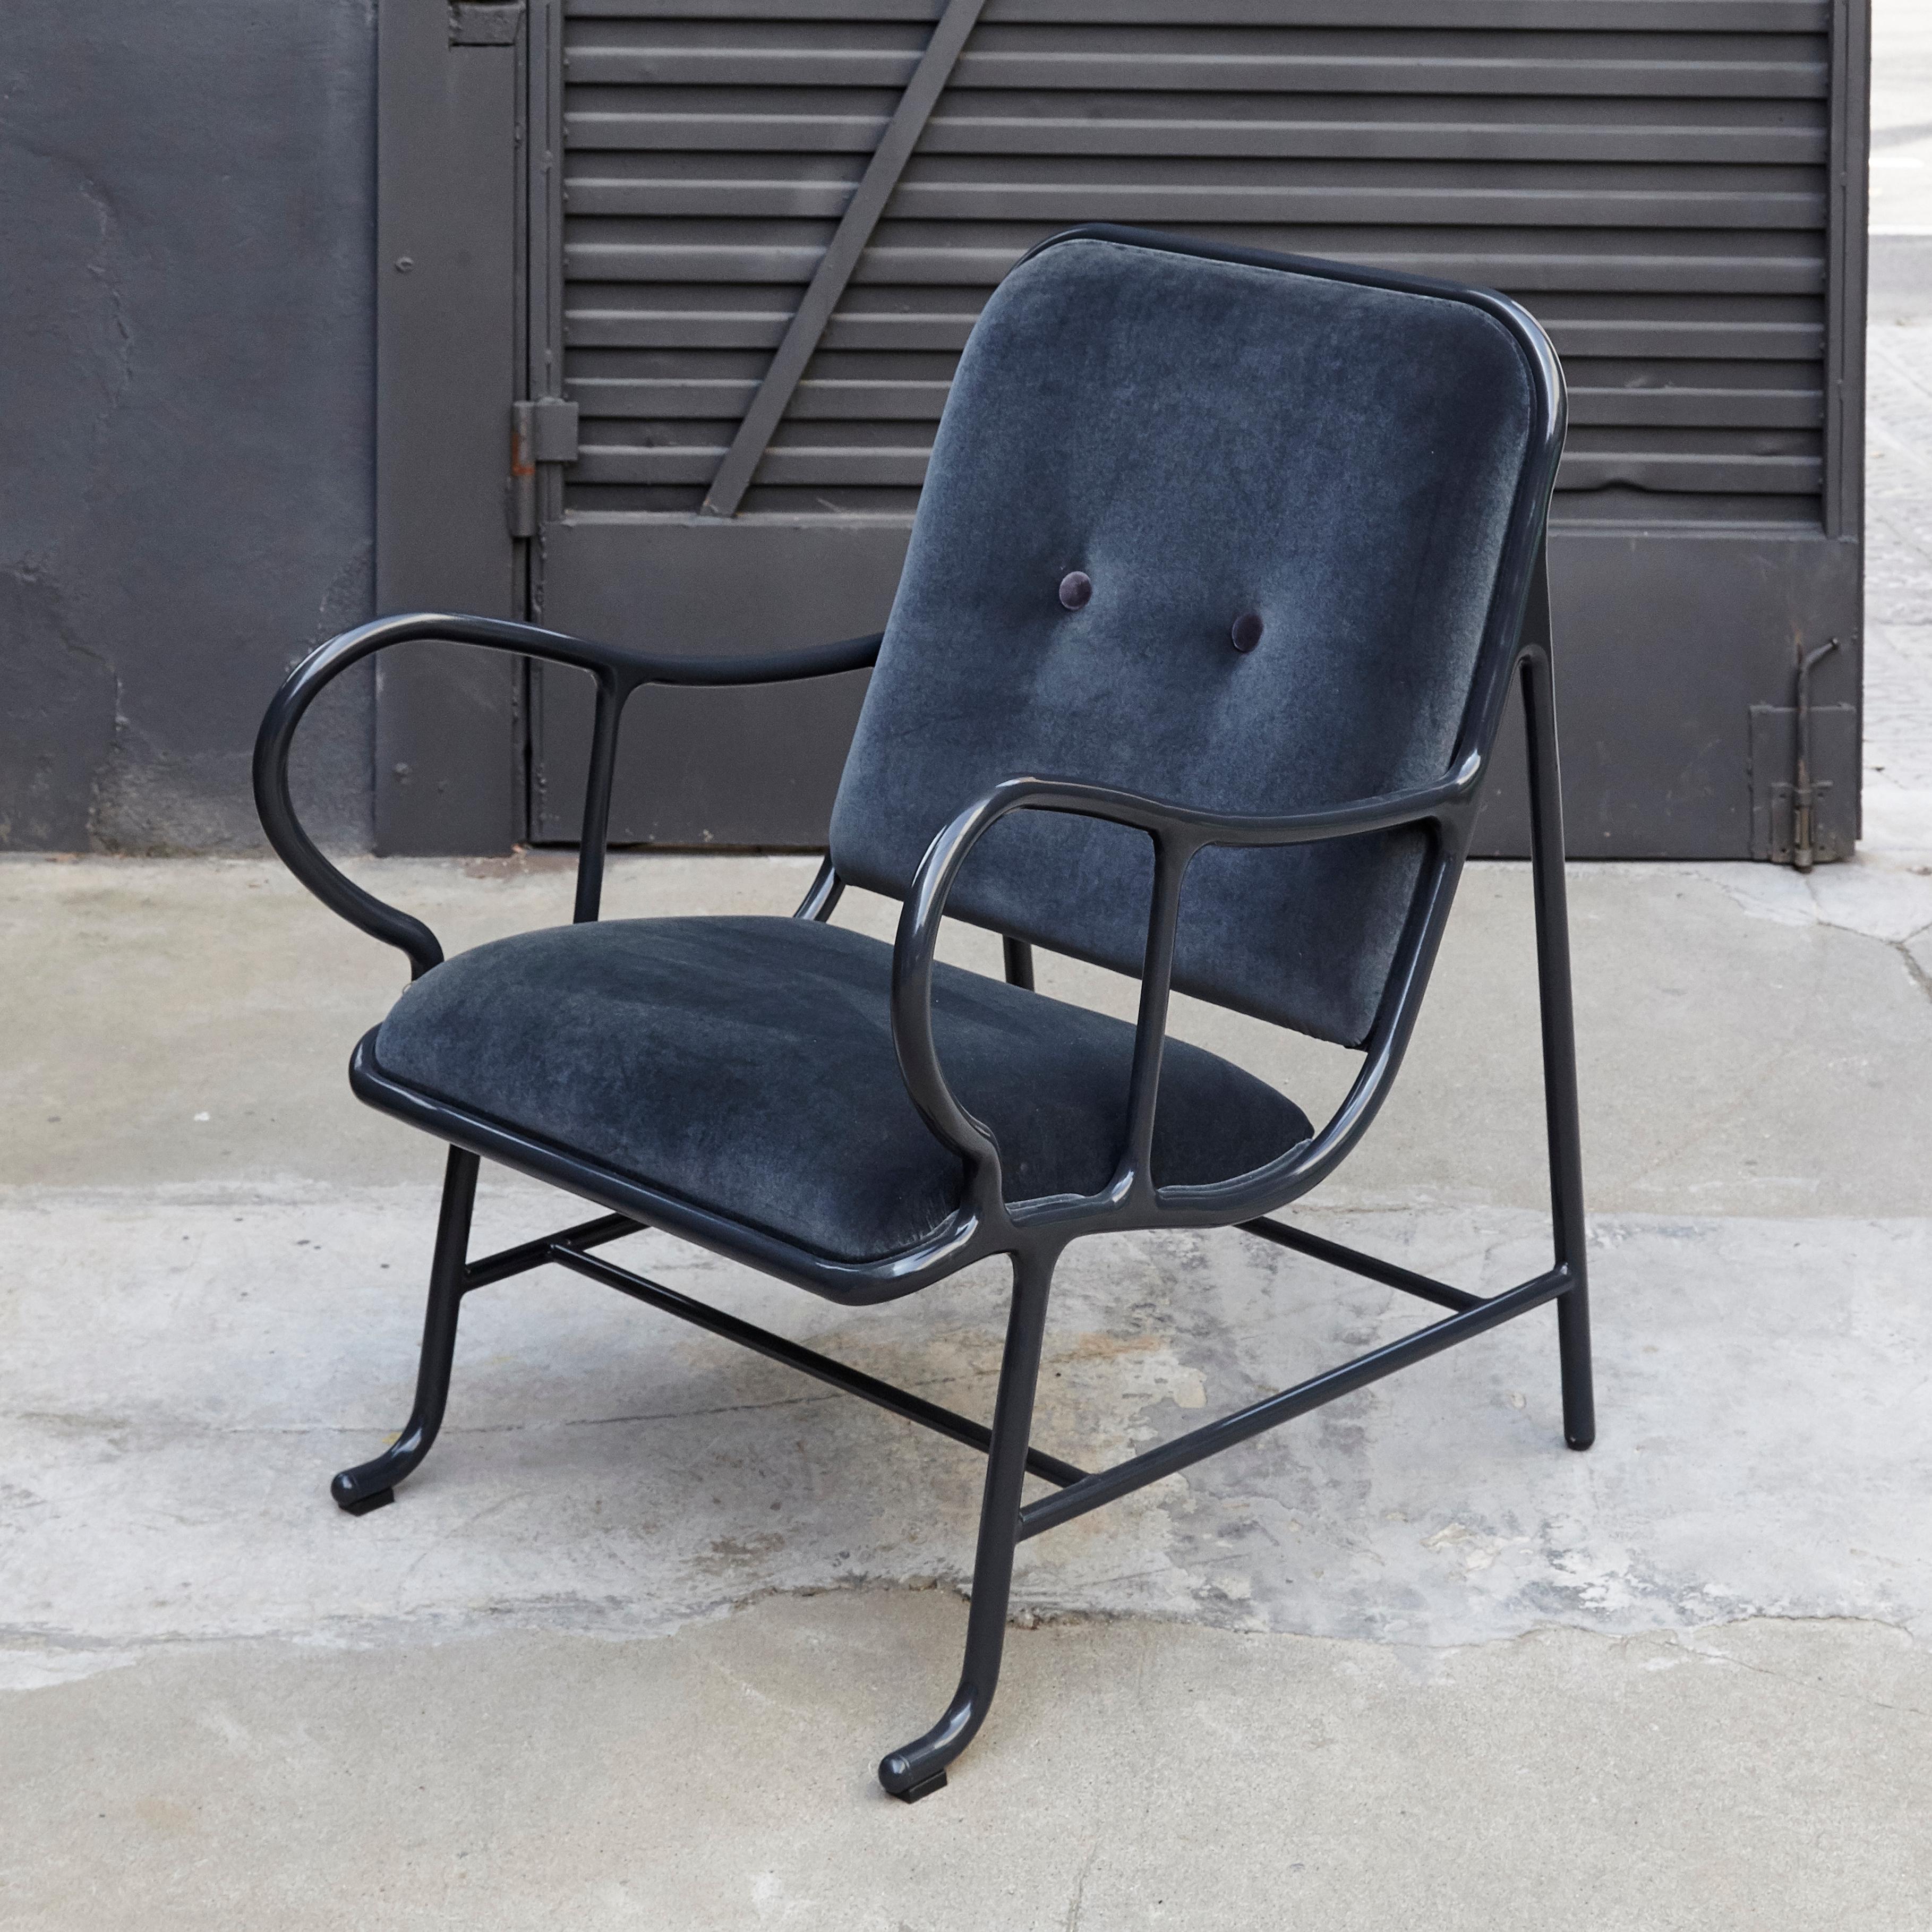 The Gardenias collection is the second largest collection by Jaime Hayon for BD.
Structure made of cast and extruded aluminium painted and dark grey velvet upholstery 

In original condition with minor wear consistent on age and use.